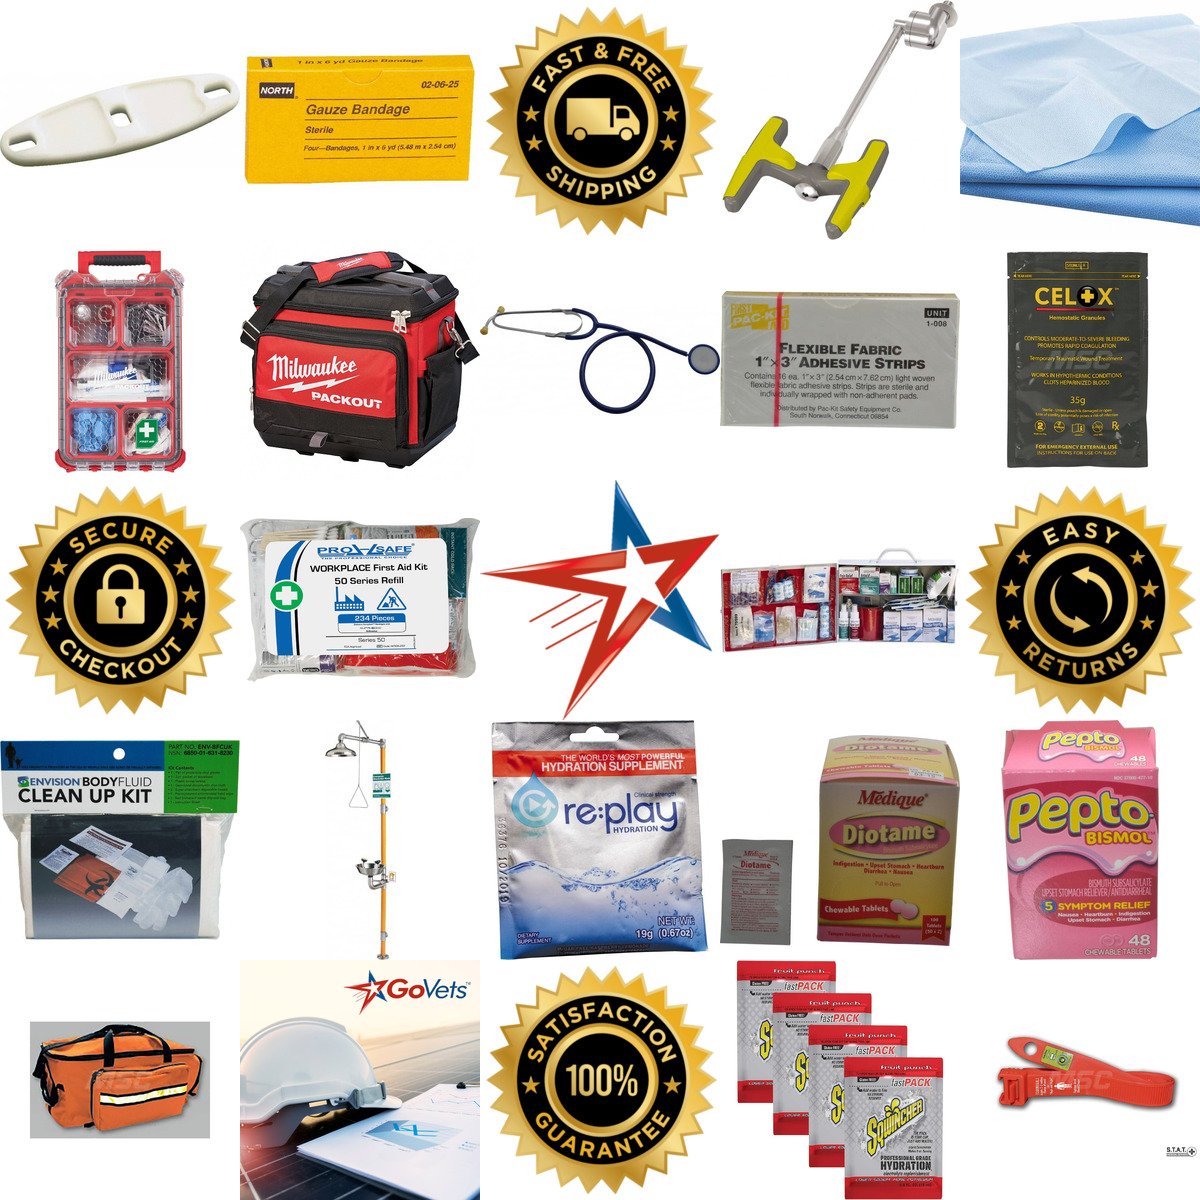 A selection of First Aid Medical and Hydration products on GoVets